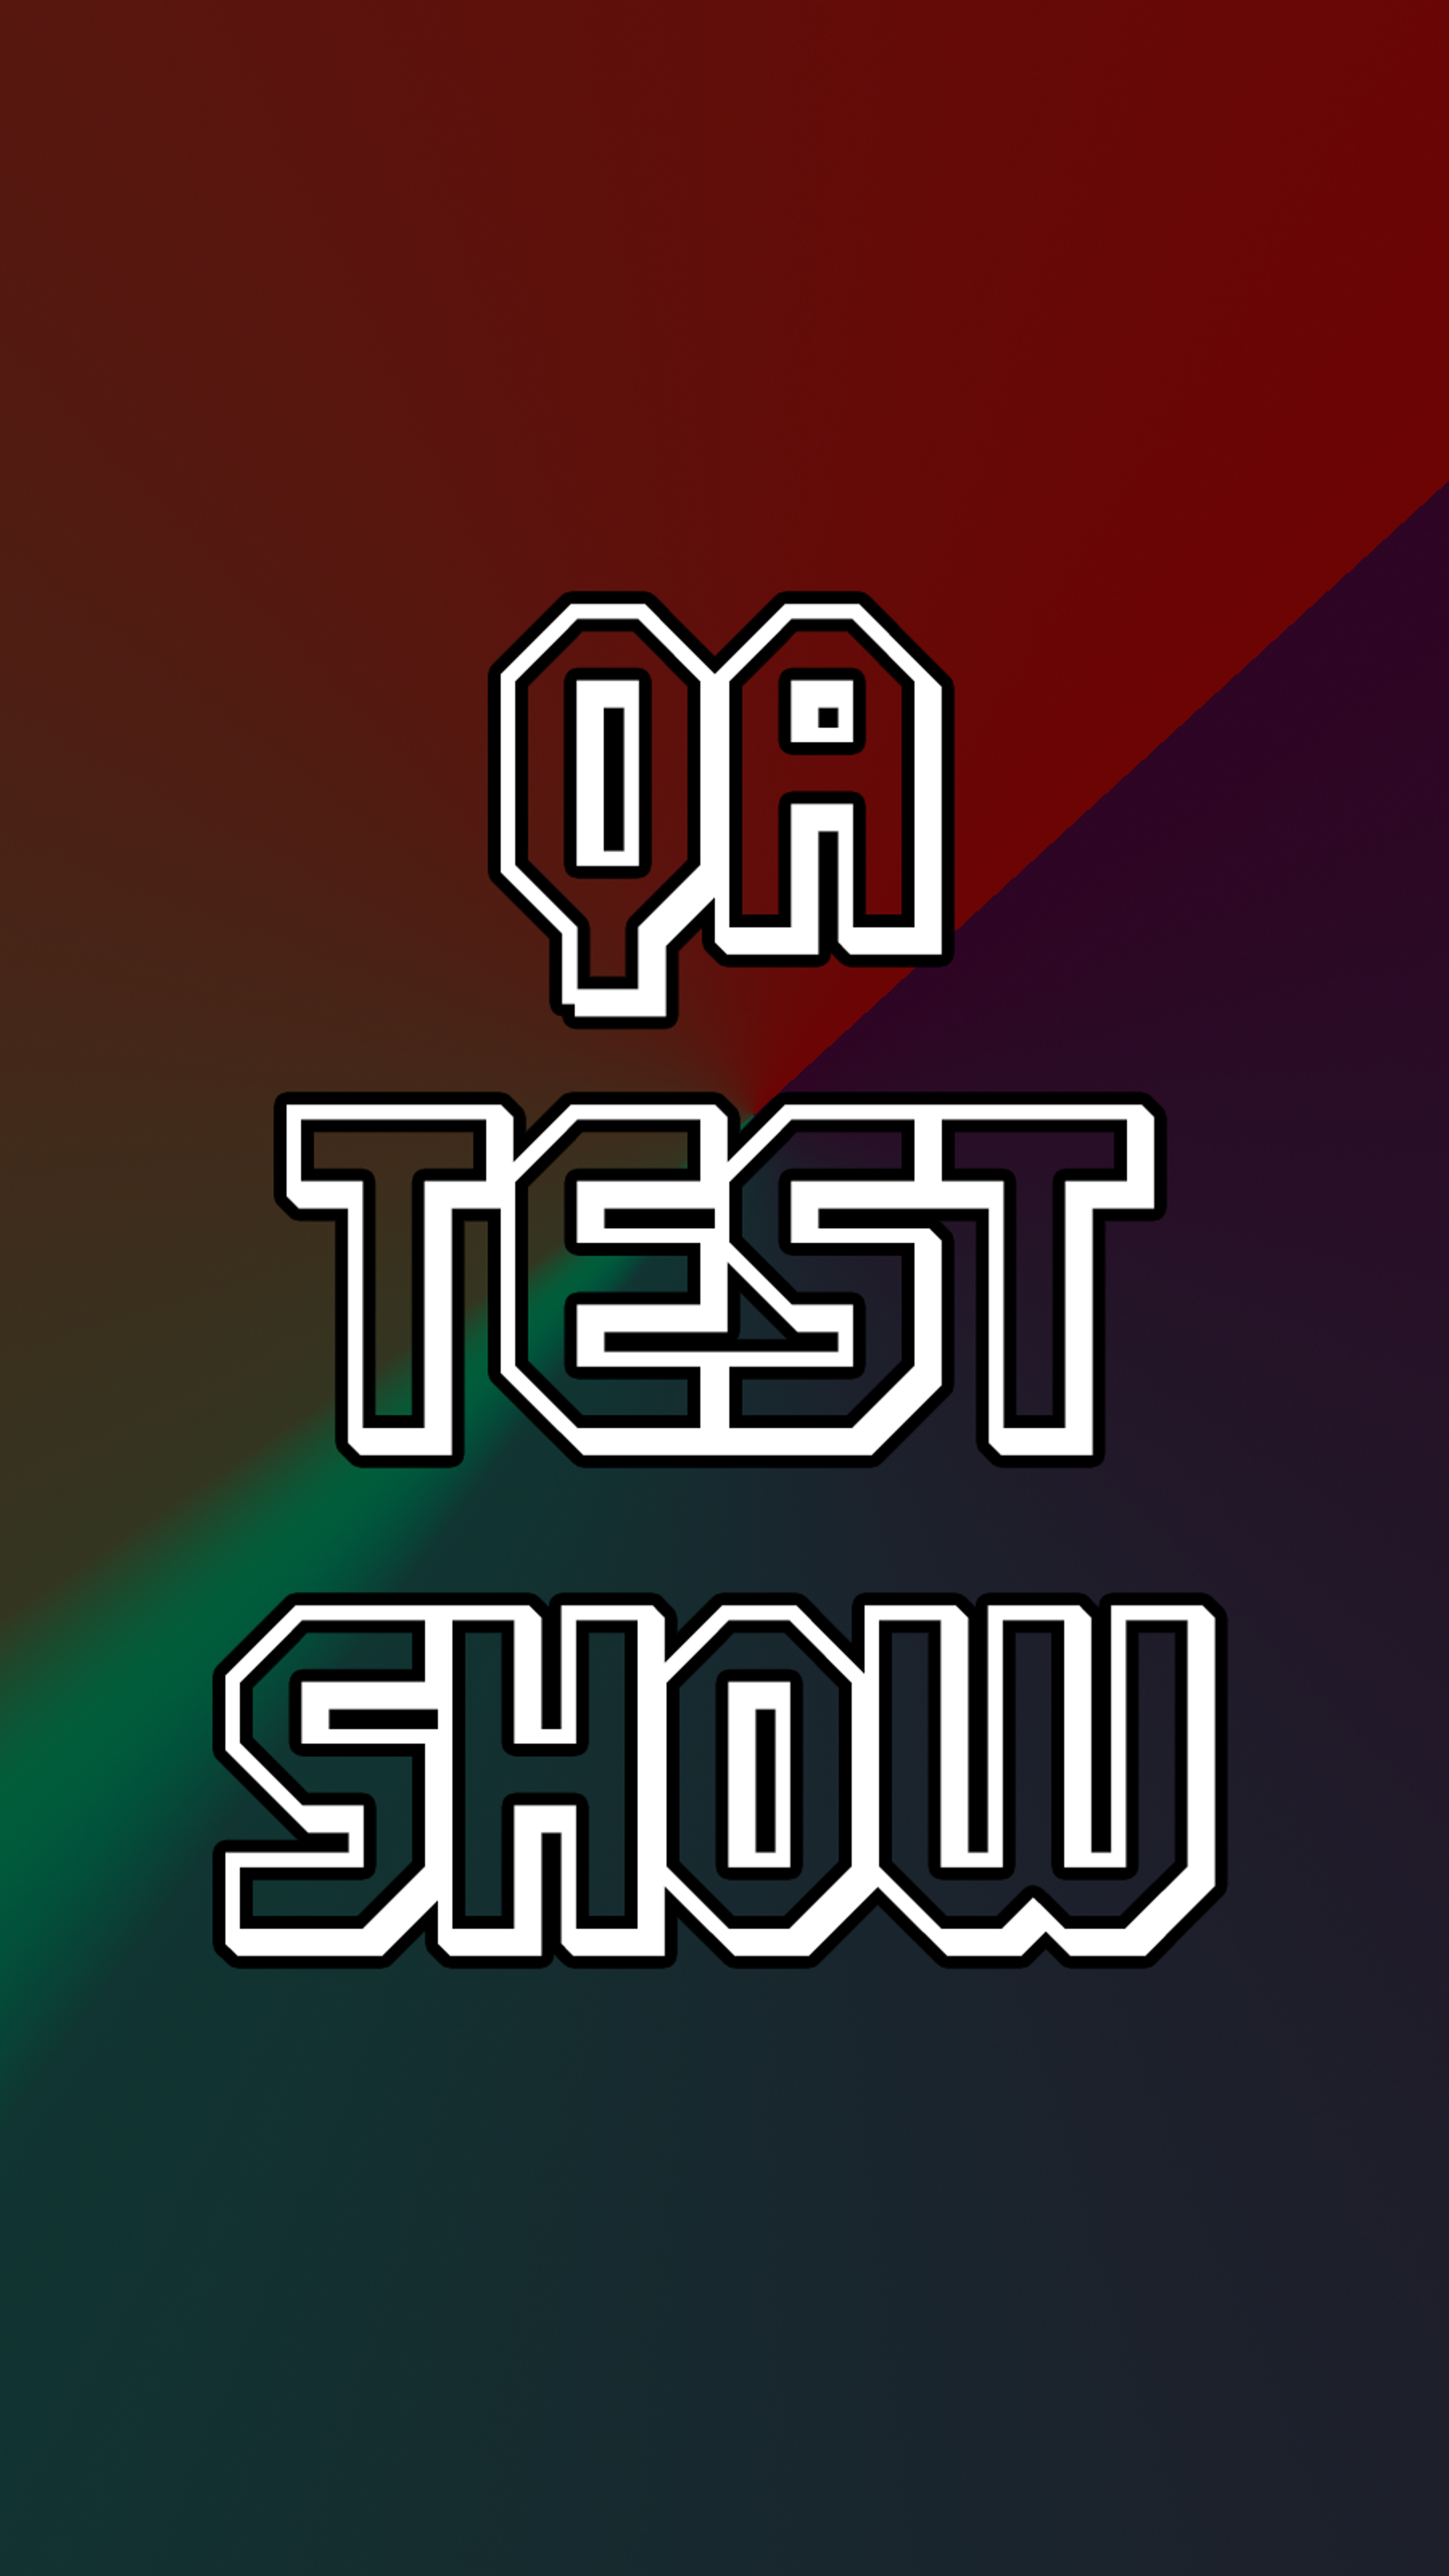 Preview image for the show titled "QA - date test 3" at Thursday, May 16 @ 5:24 PM